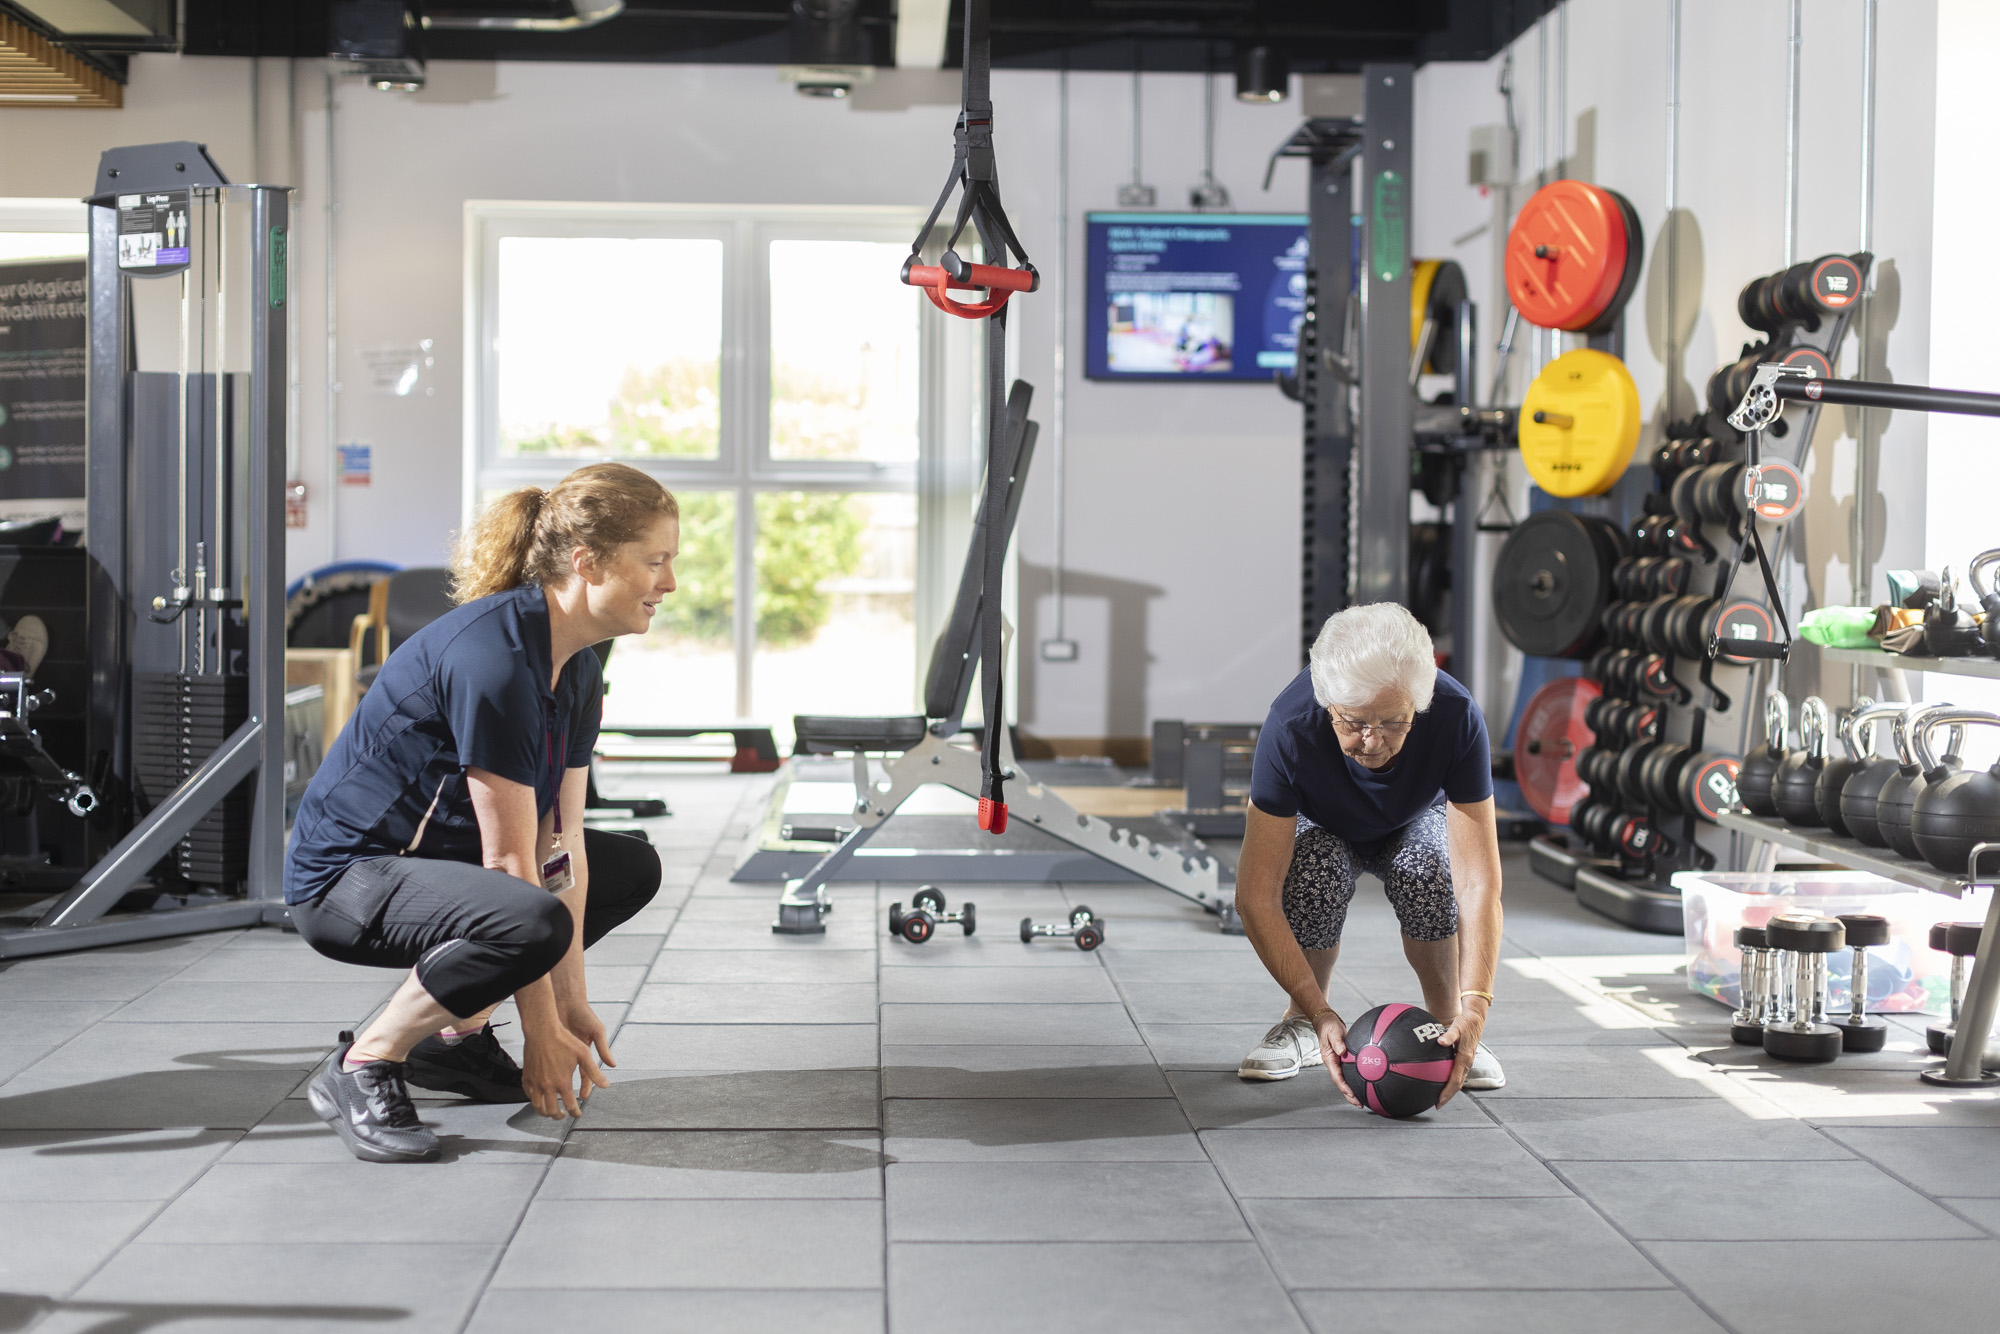 Female patient teaching an elderly patient squat technique involving a weighted ball